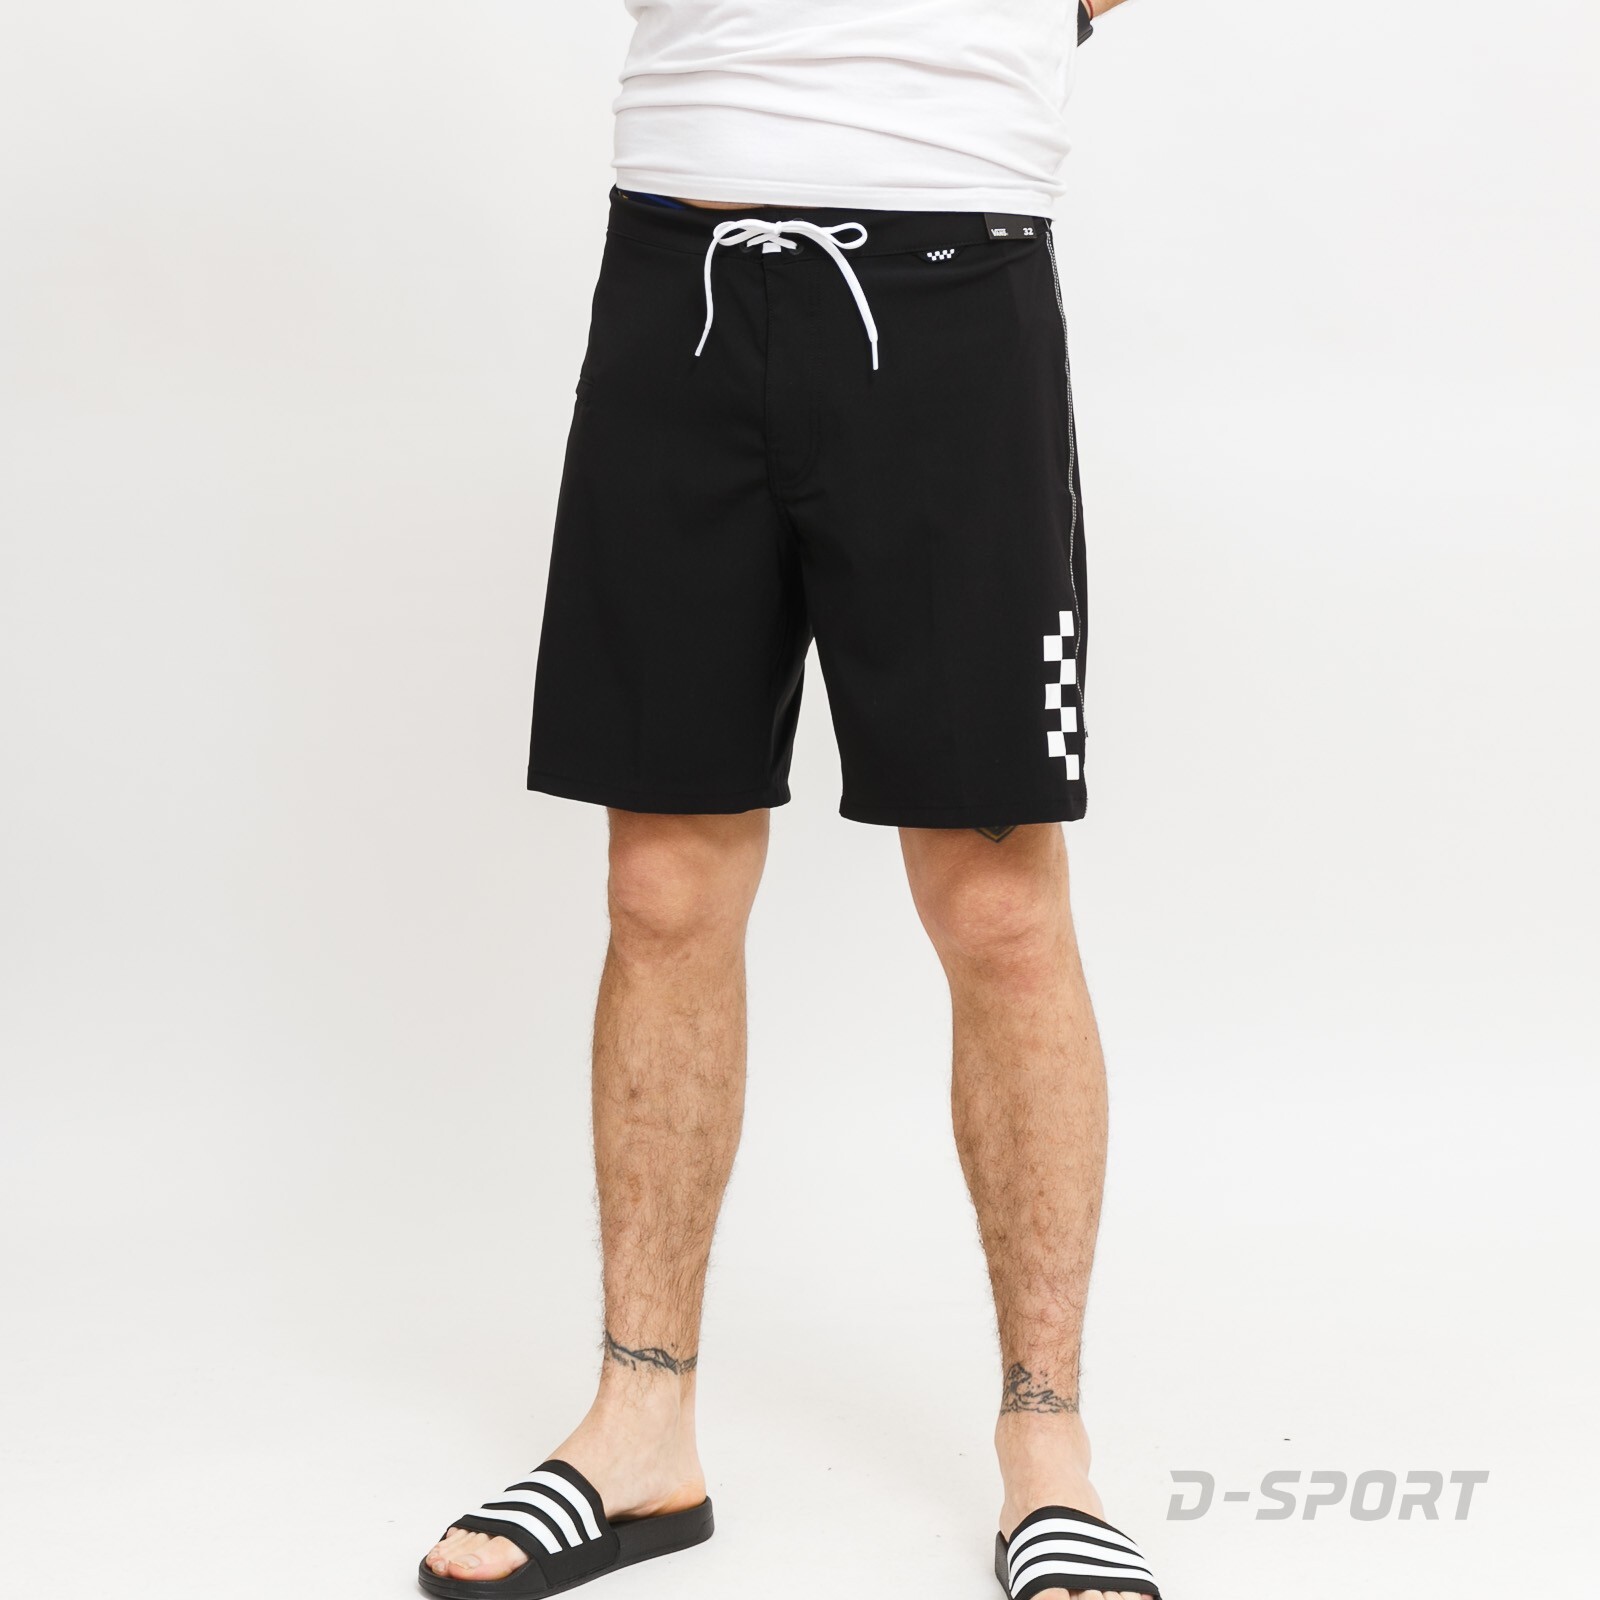 THE DAILY SOLID BOARDSHORT